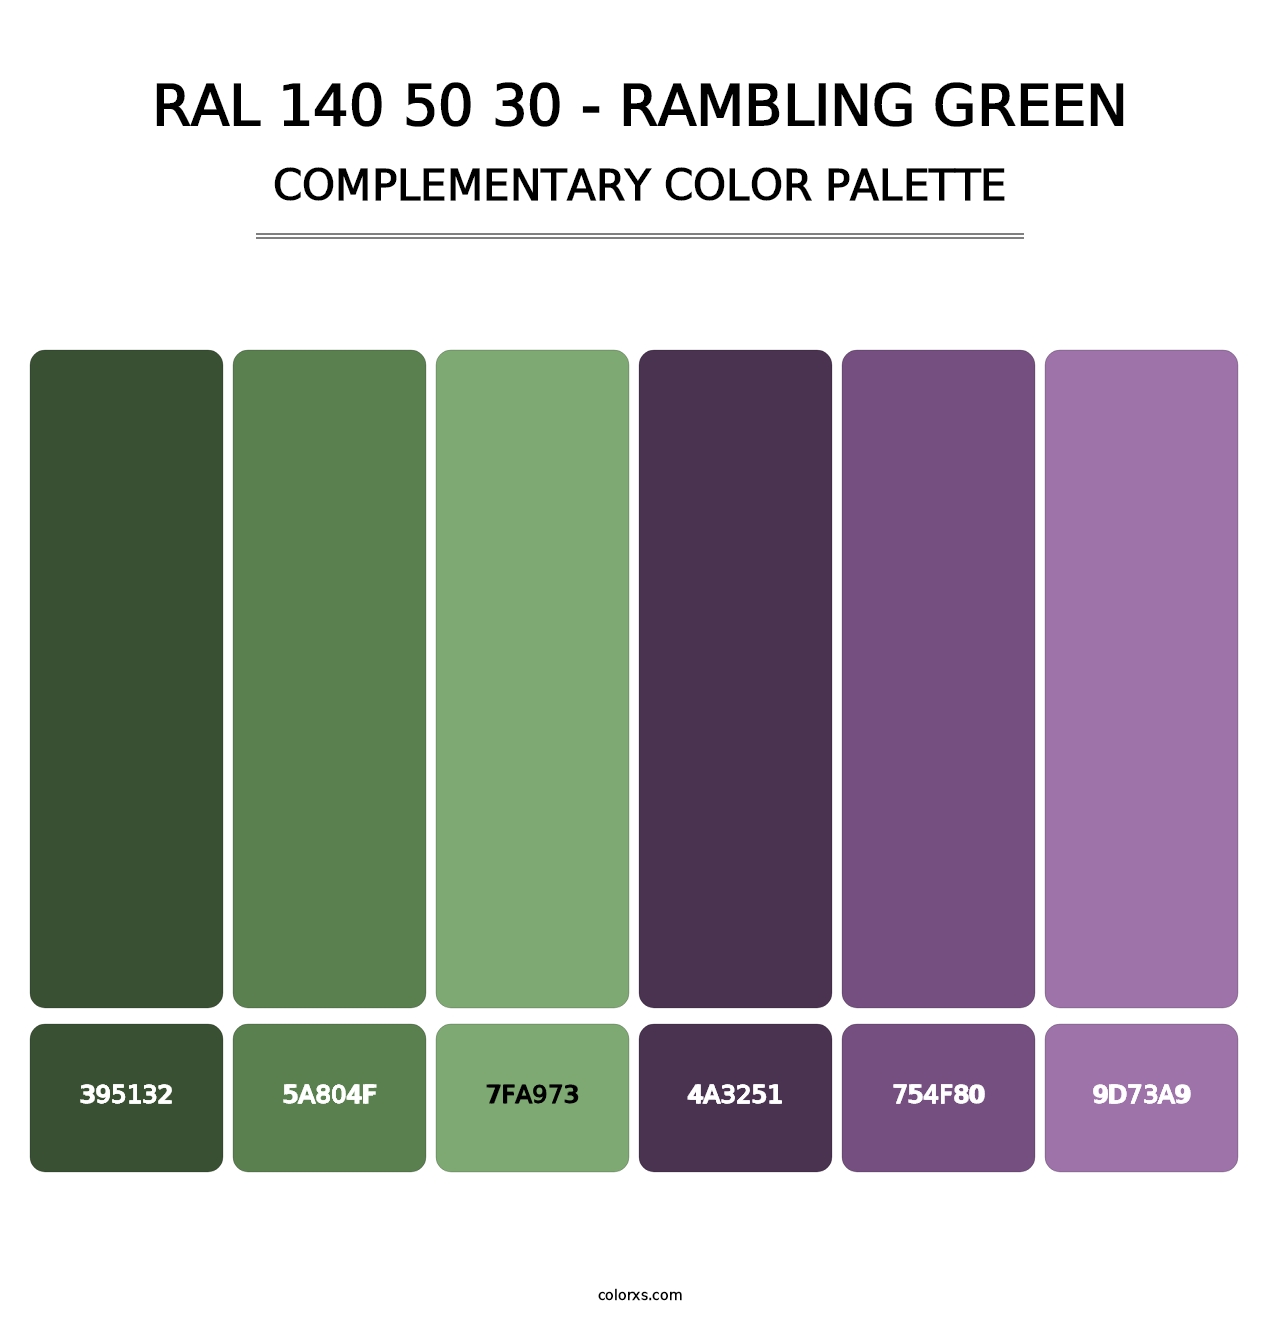 RAL 140 50 30 - Rambling Green - Complementary Color Palette